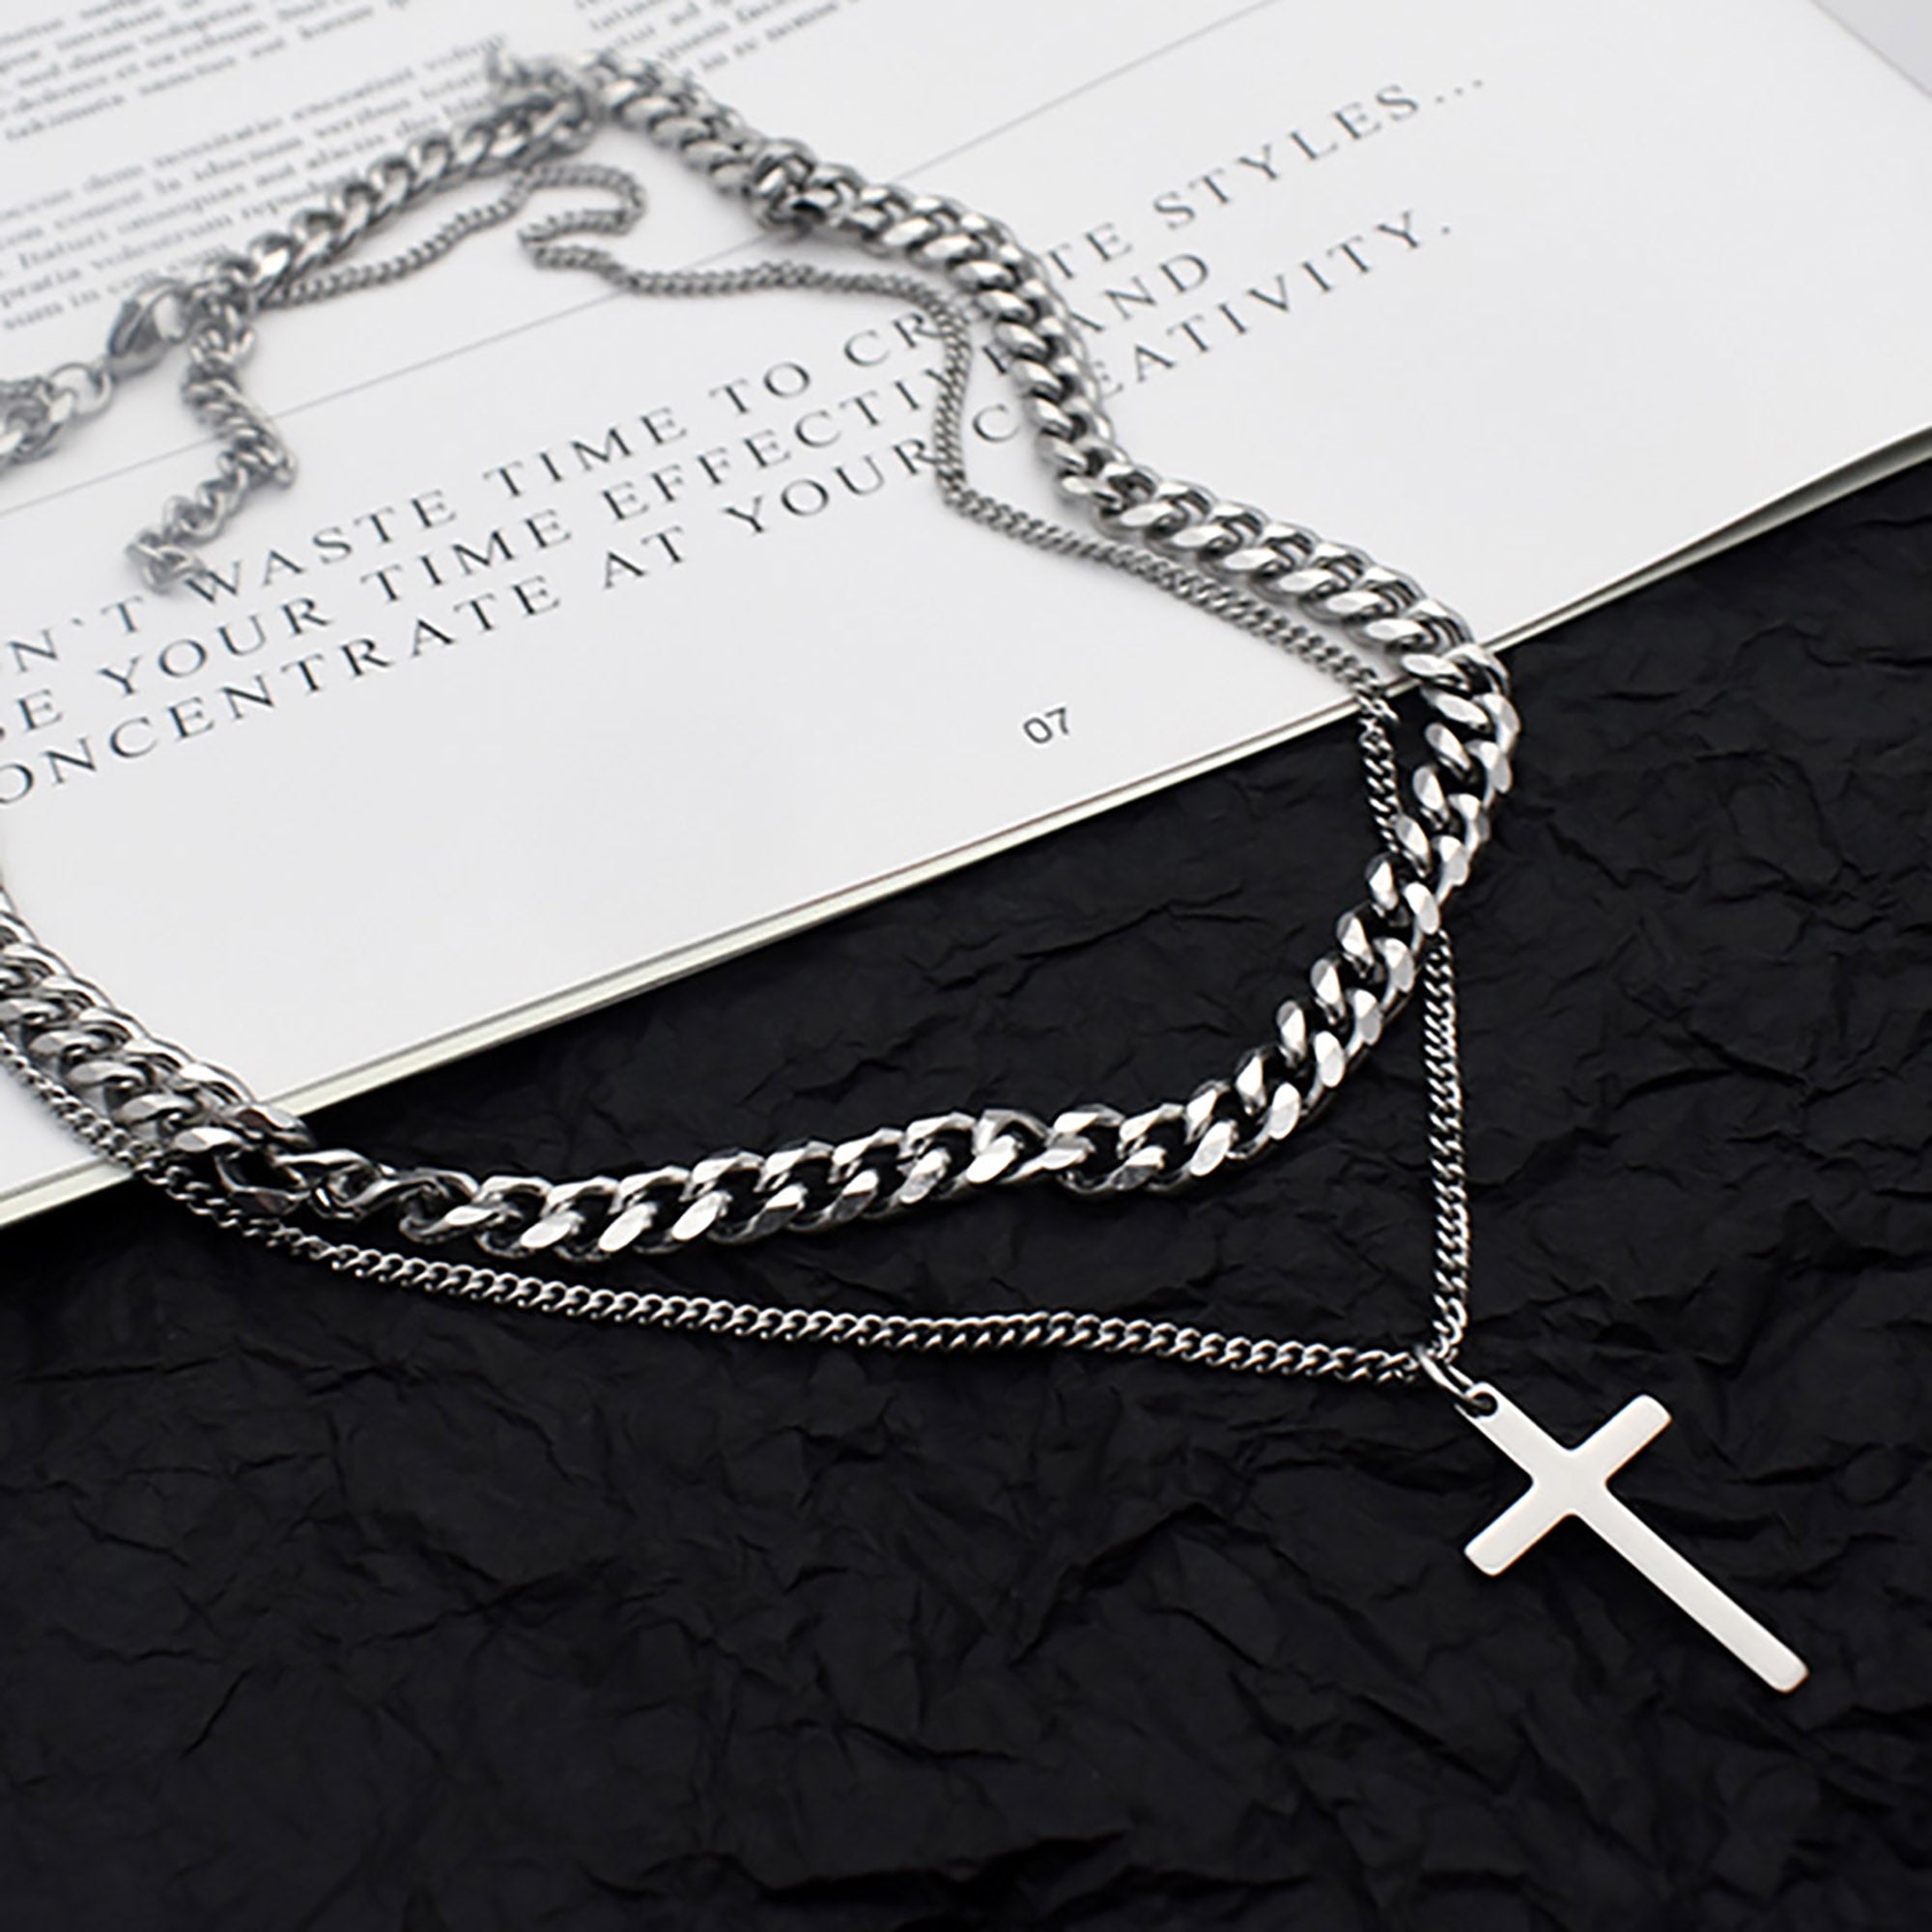 Stainless Steel 42cm Cross Pendant Layered Necklace Valentine Day Gift KOL / Youtuber / Celebrity / Fashion Icon styling